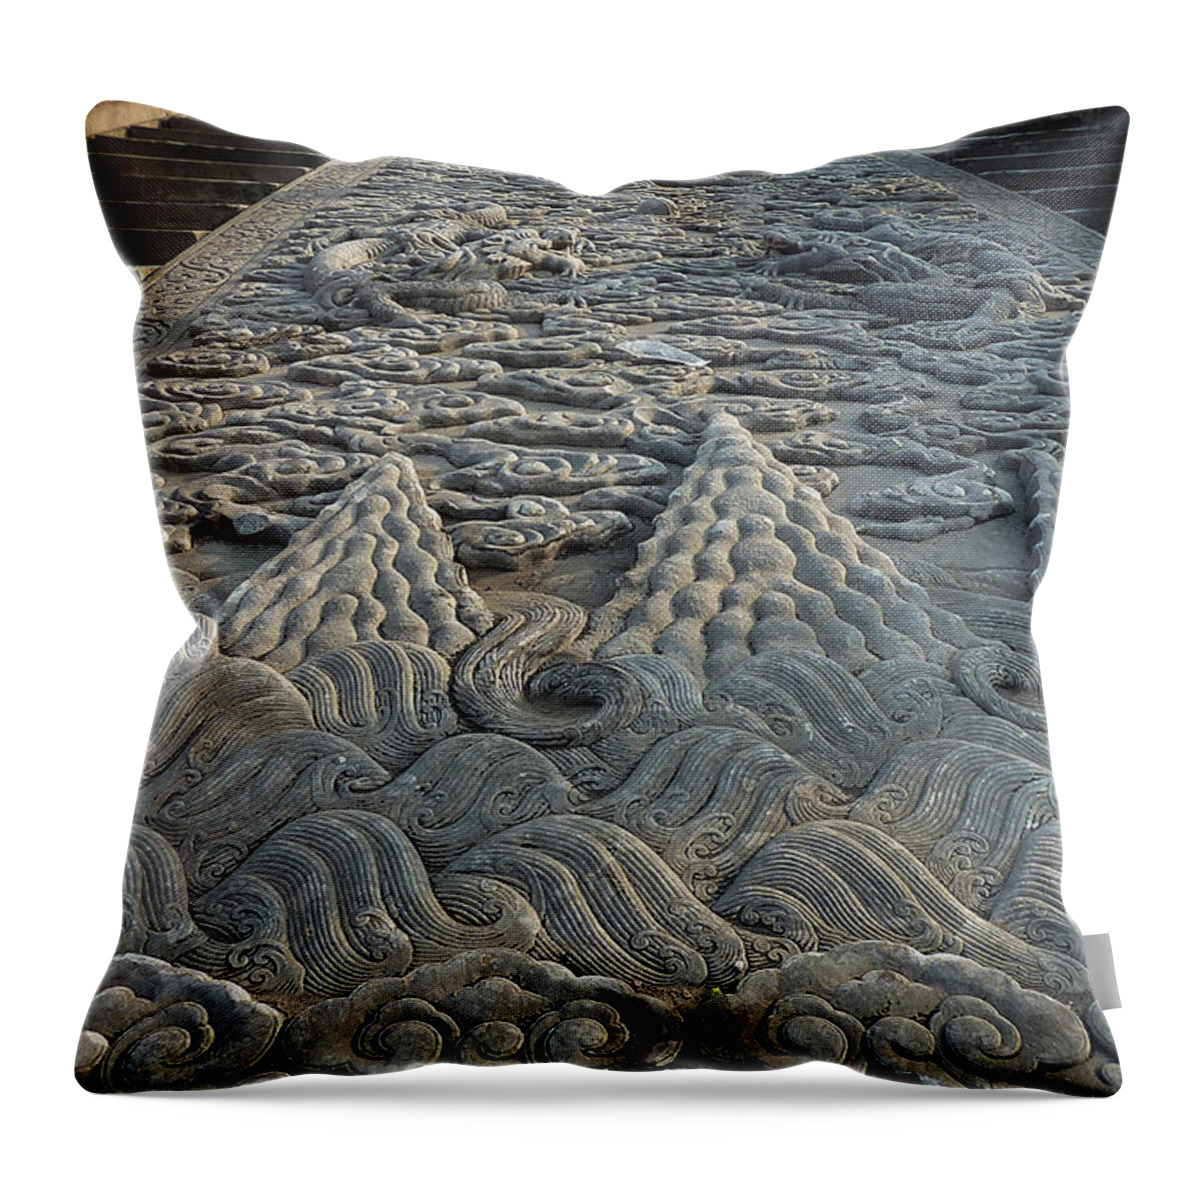 Dragon Throw Pillow featuring the photograph The Dragon III by Xueling Zou